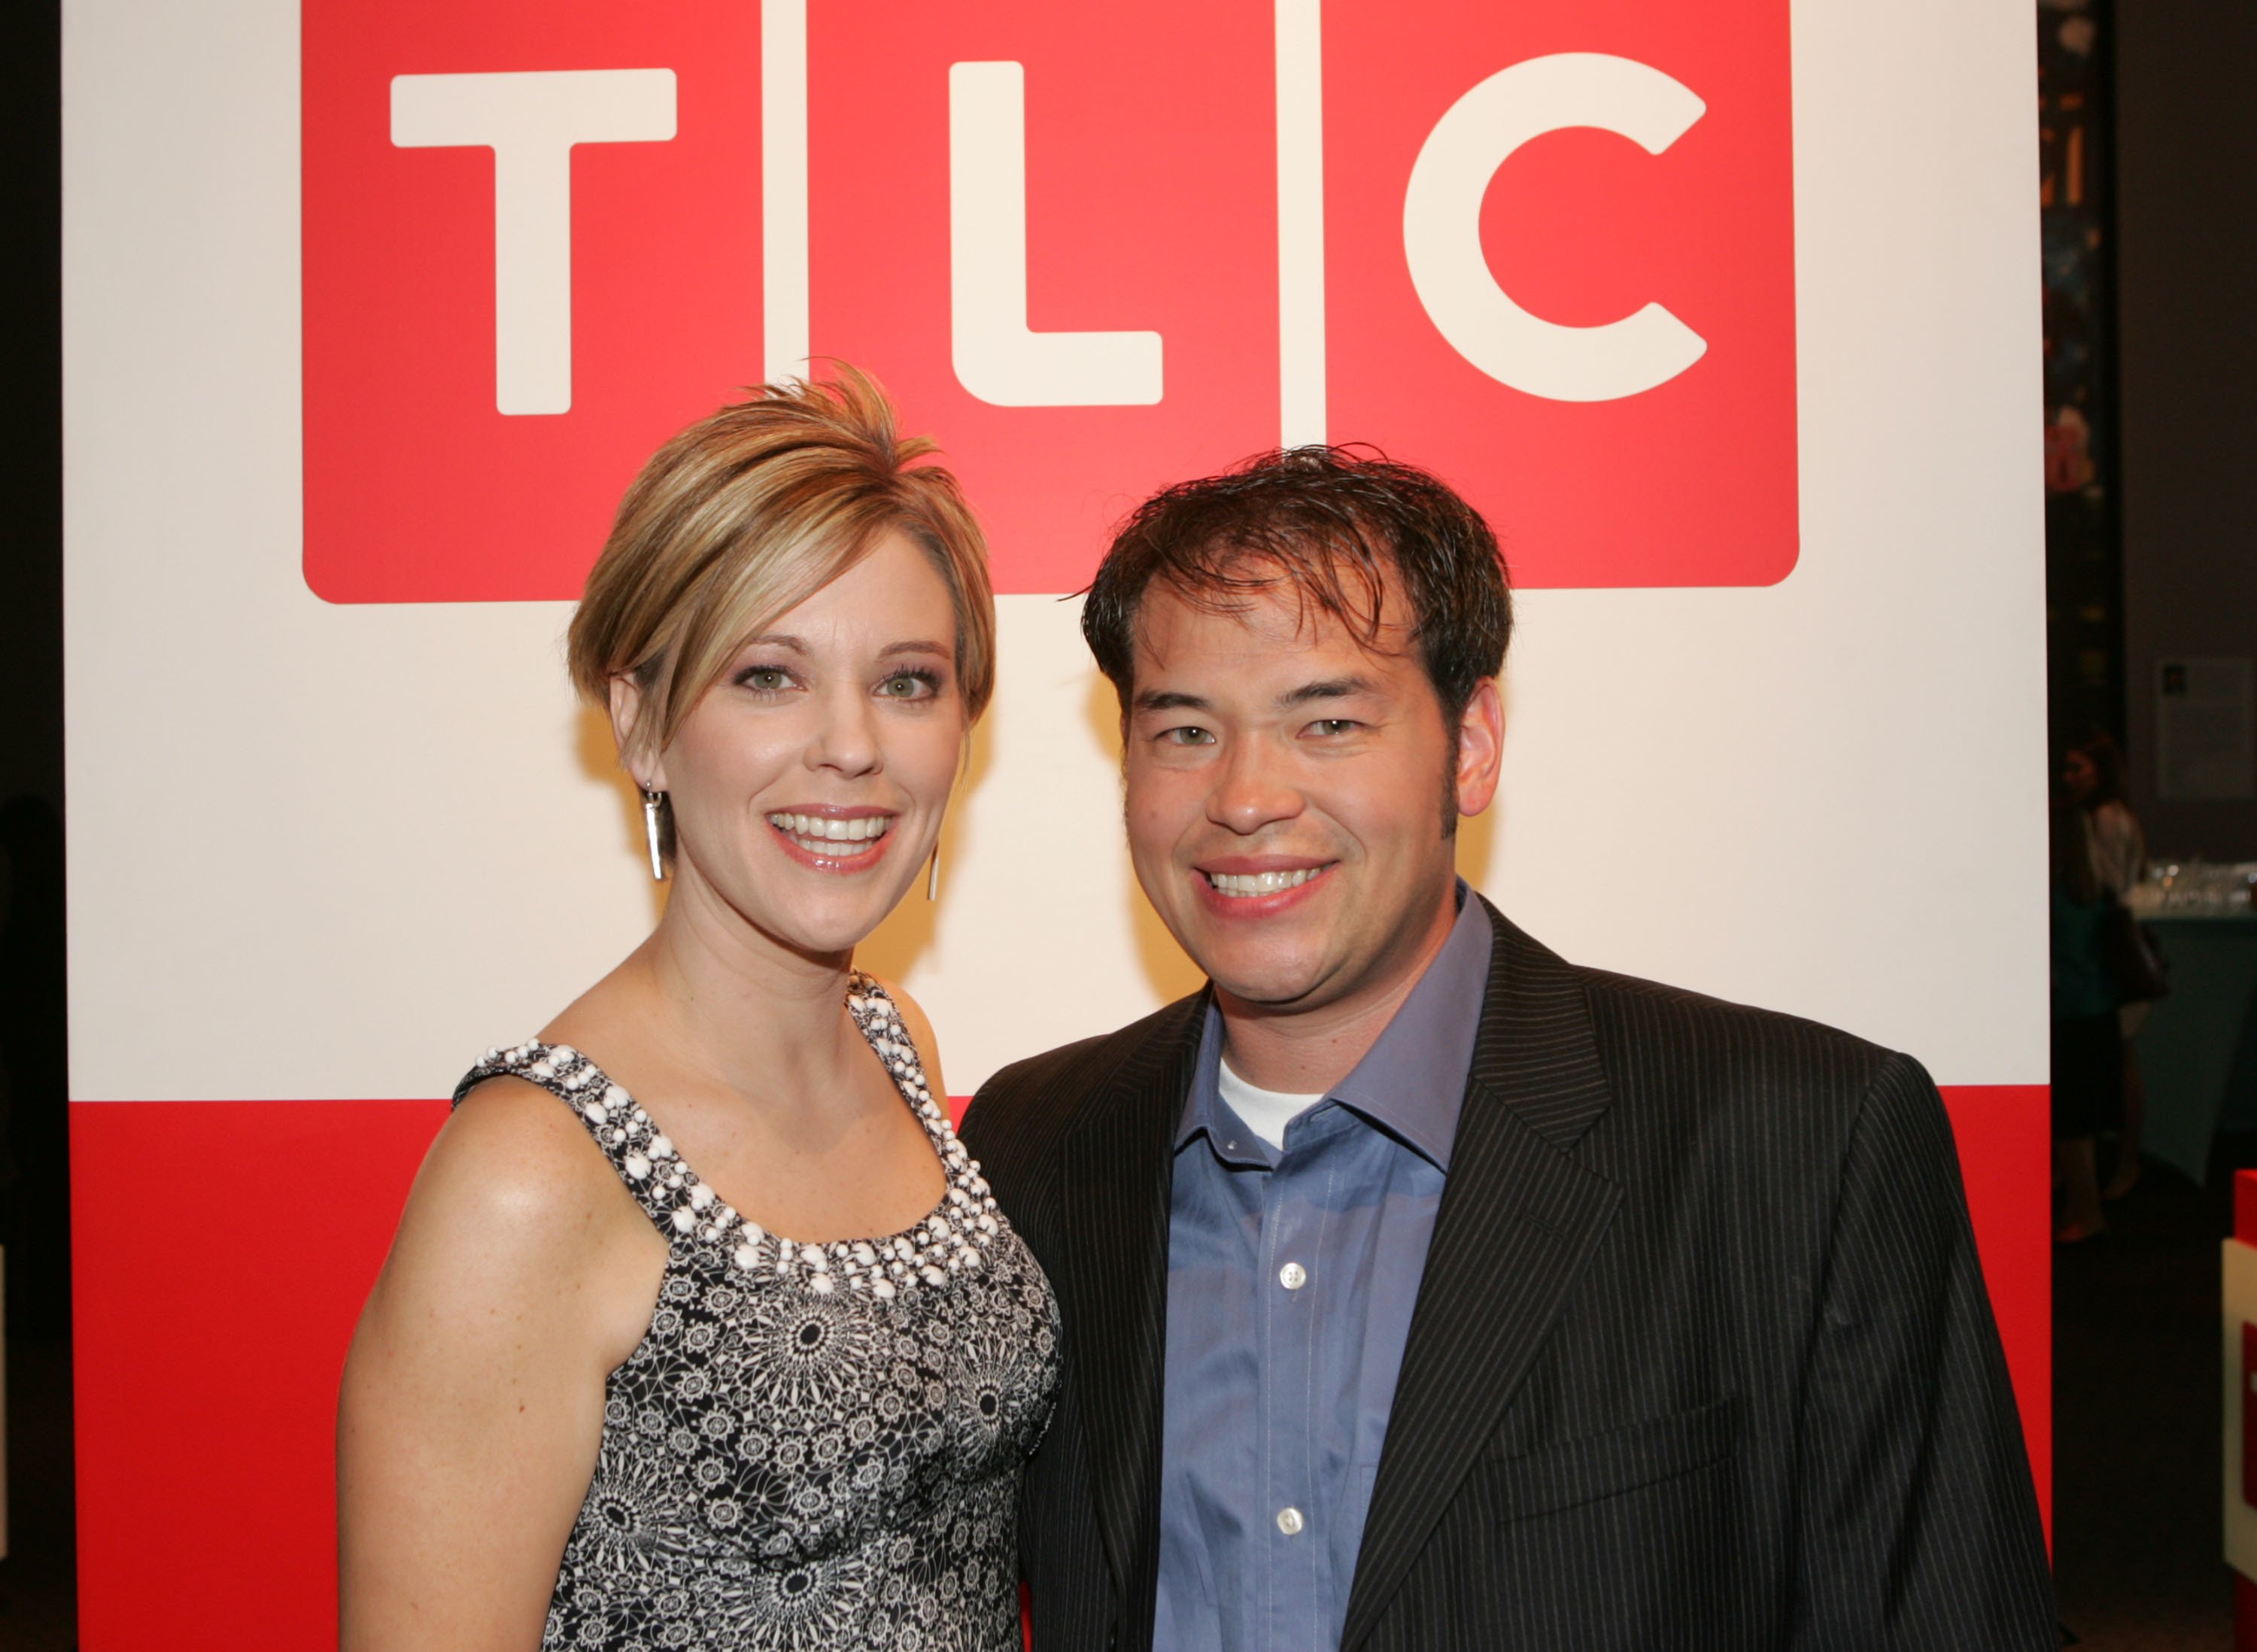  Jon and Kate Gosselin at the Discovery Upfront at Jazz event at the Lincoln in 2008 | Photo: Getty Images